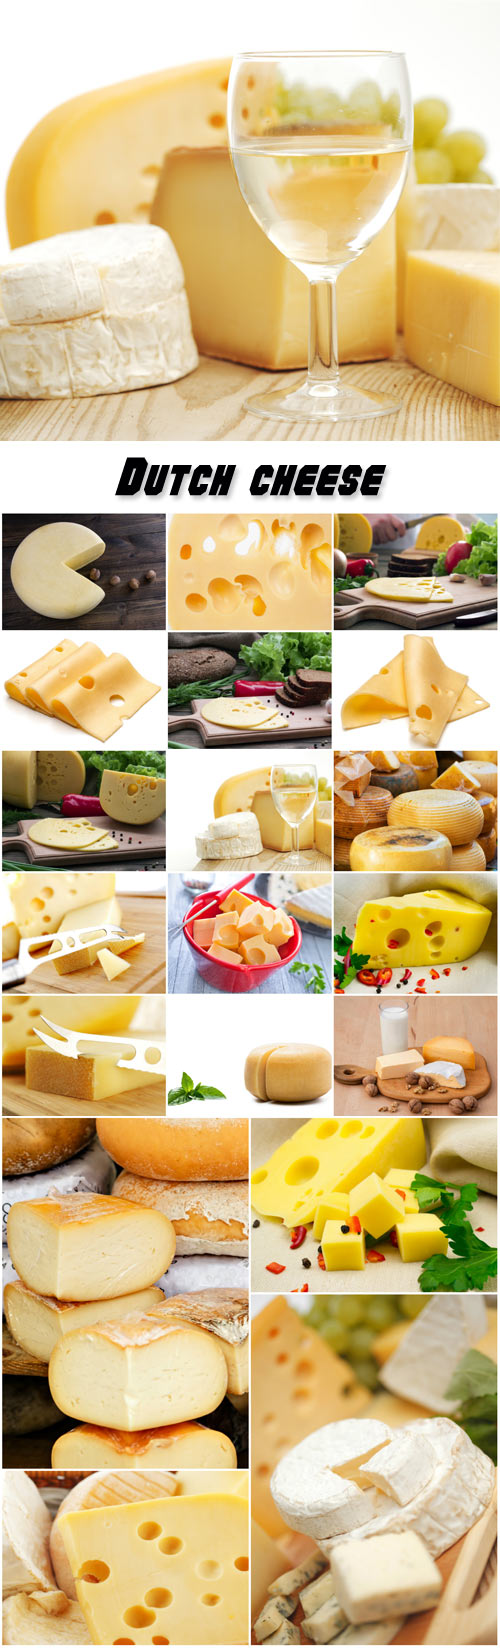 Dutch cheese, dairy products